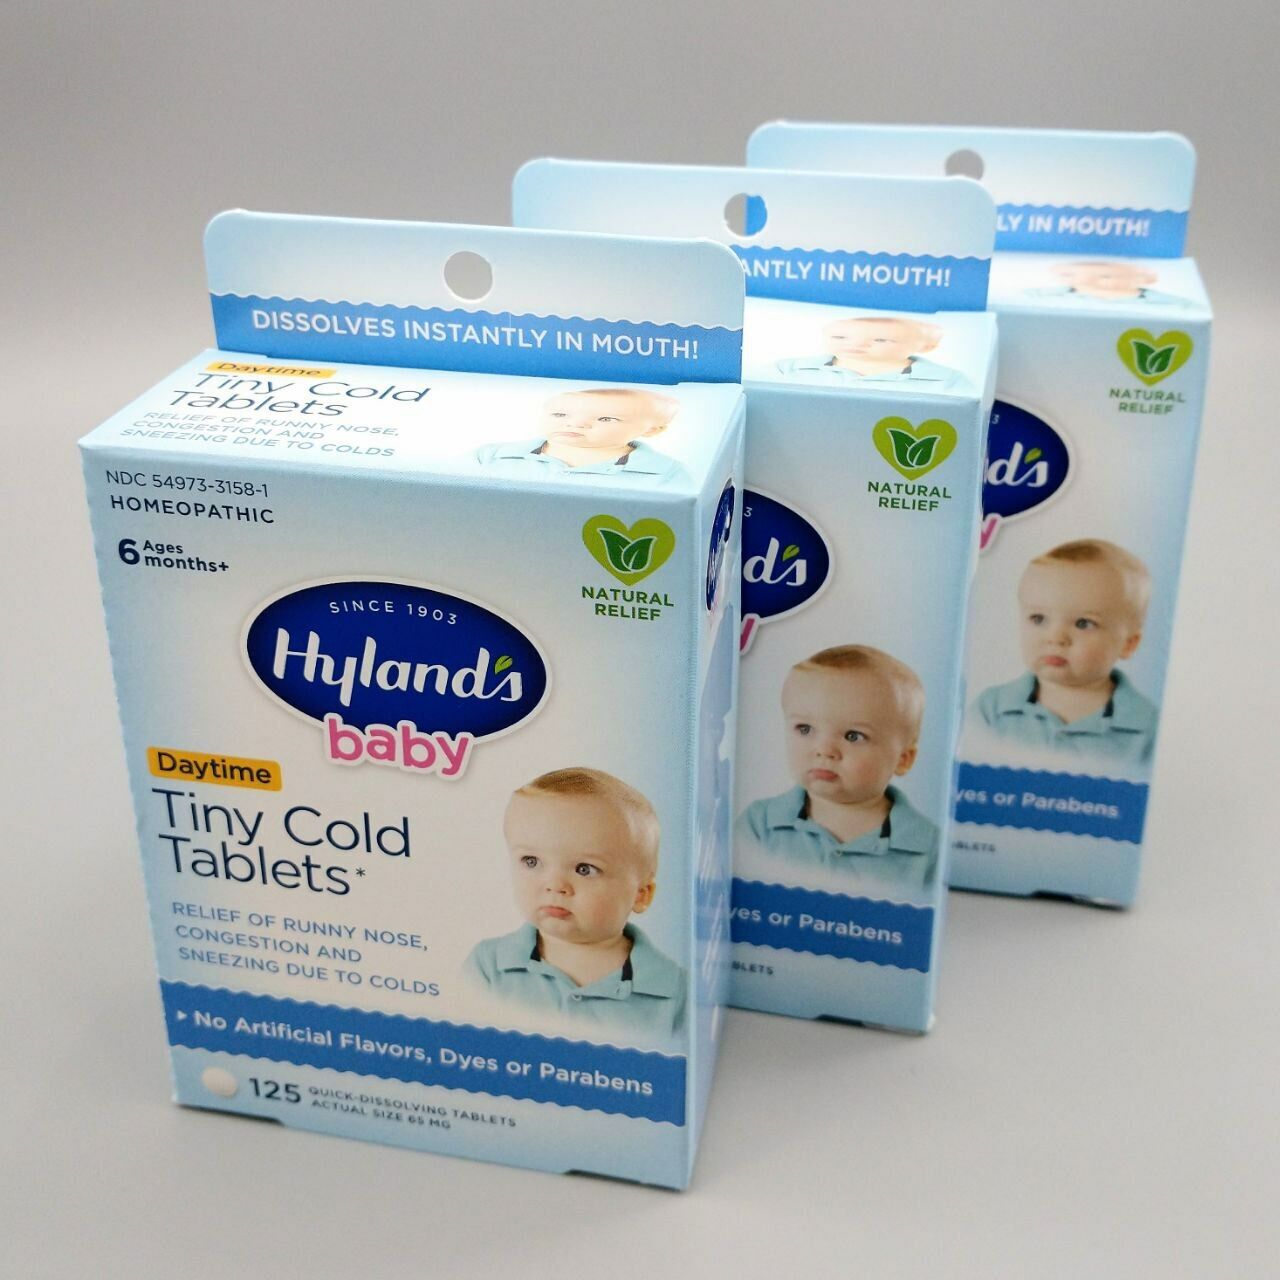 Hyland's Baby Daytime Tiny Cold Tablets, 6 Ages Months+ 125 Tablets (3 Pack) Hylands N/a - фотография #2